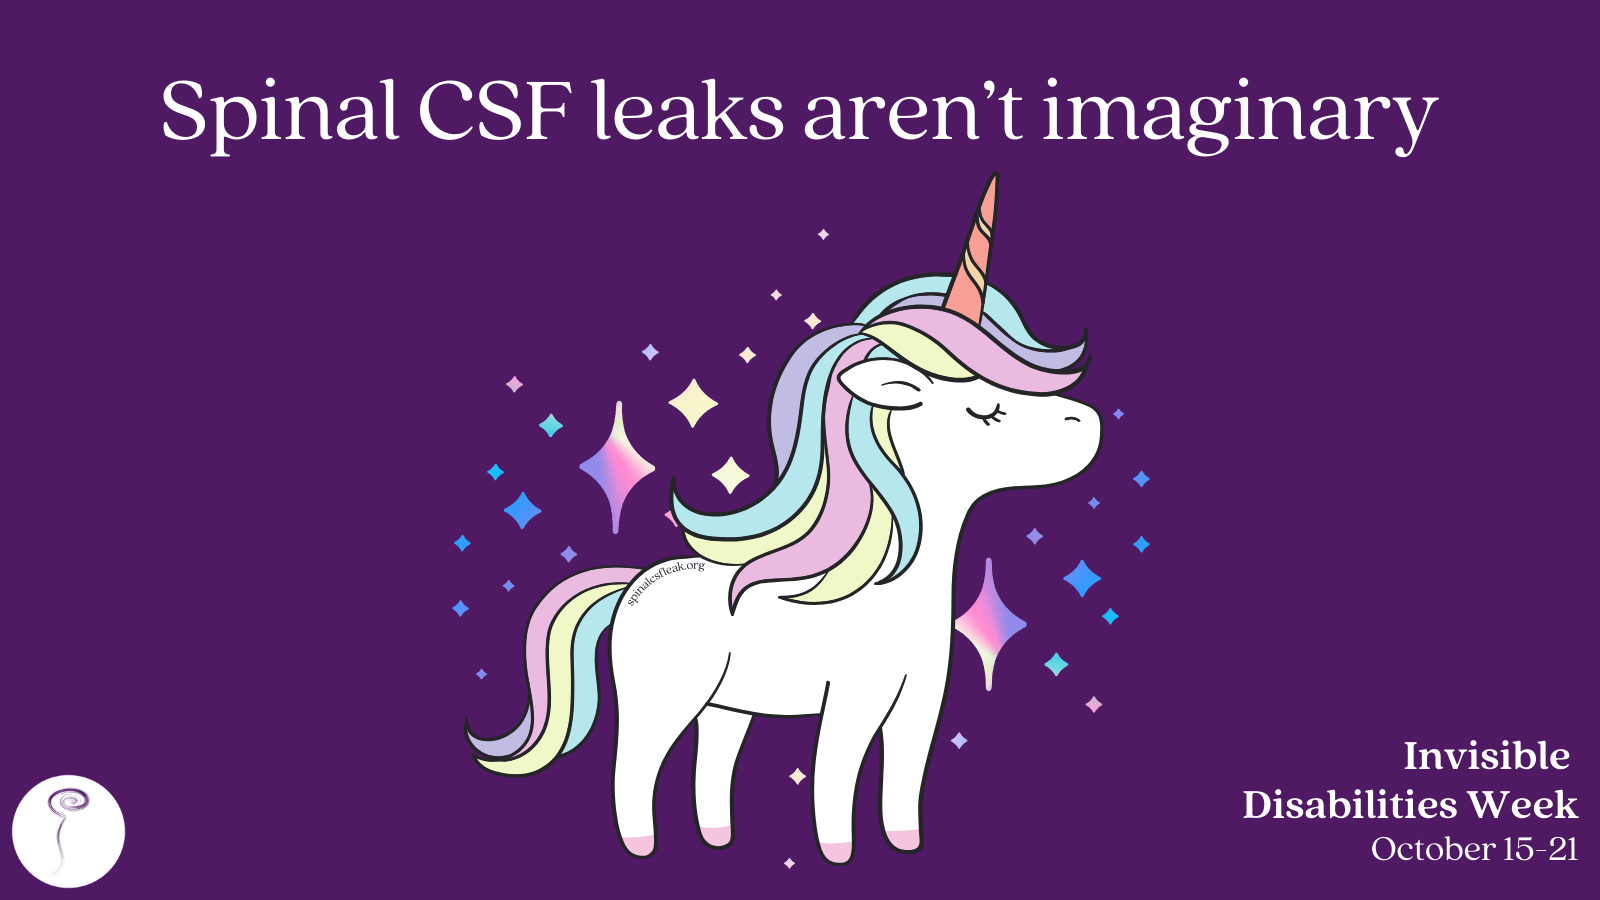 spinal csf leaks aren't imaginary, they're invisible